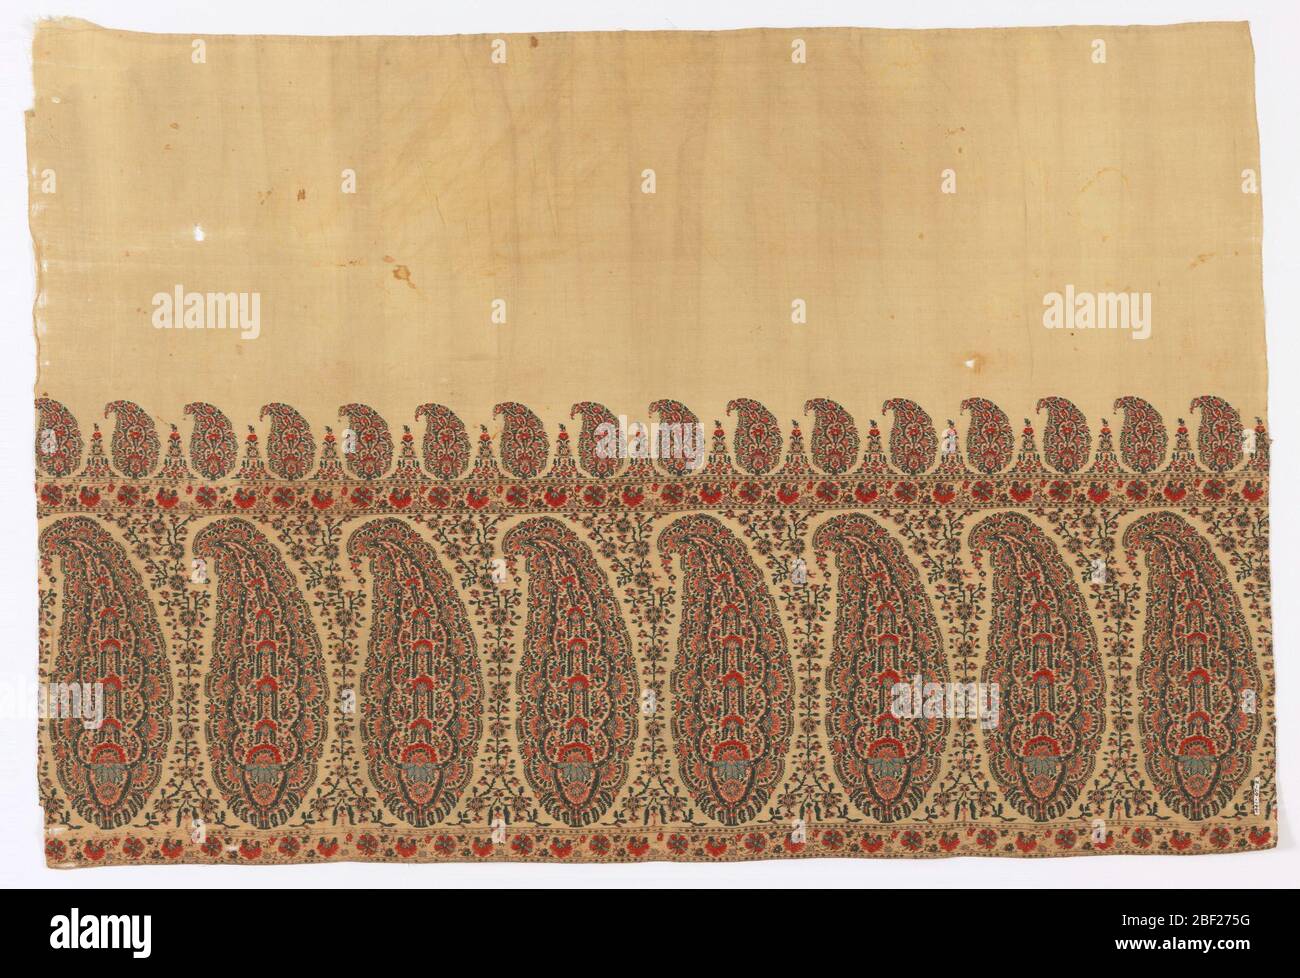 Shawl border. Fragment of a shawl border with an ivory colored field and a deep boder of boteh or paisley forms filled with tiny floral forms. Flanked top and bottom with a narrow band with a repeating design of carnations, alternating frontal and profile view. Stock Photo